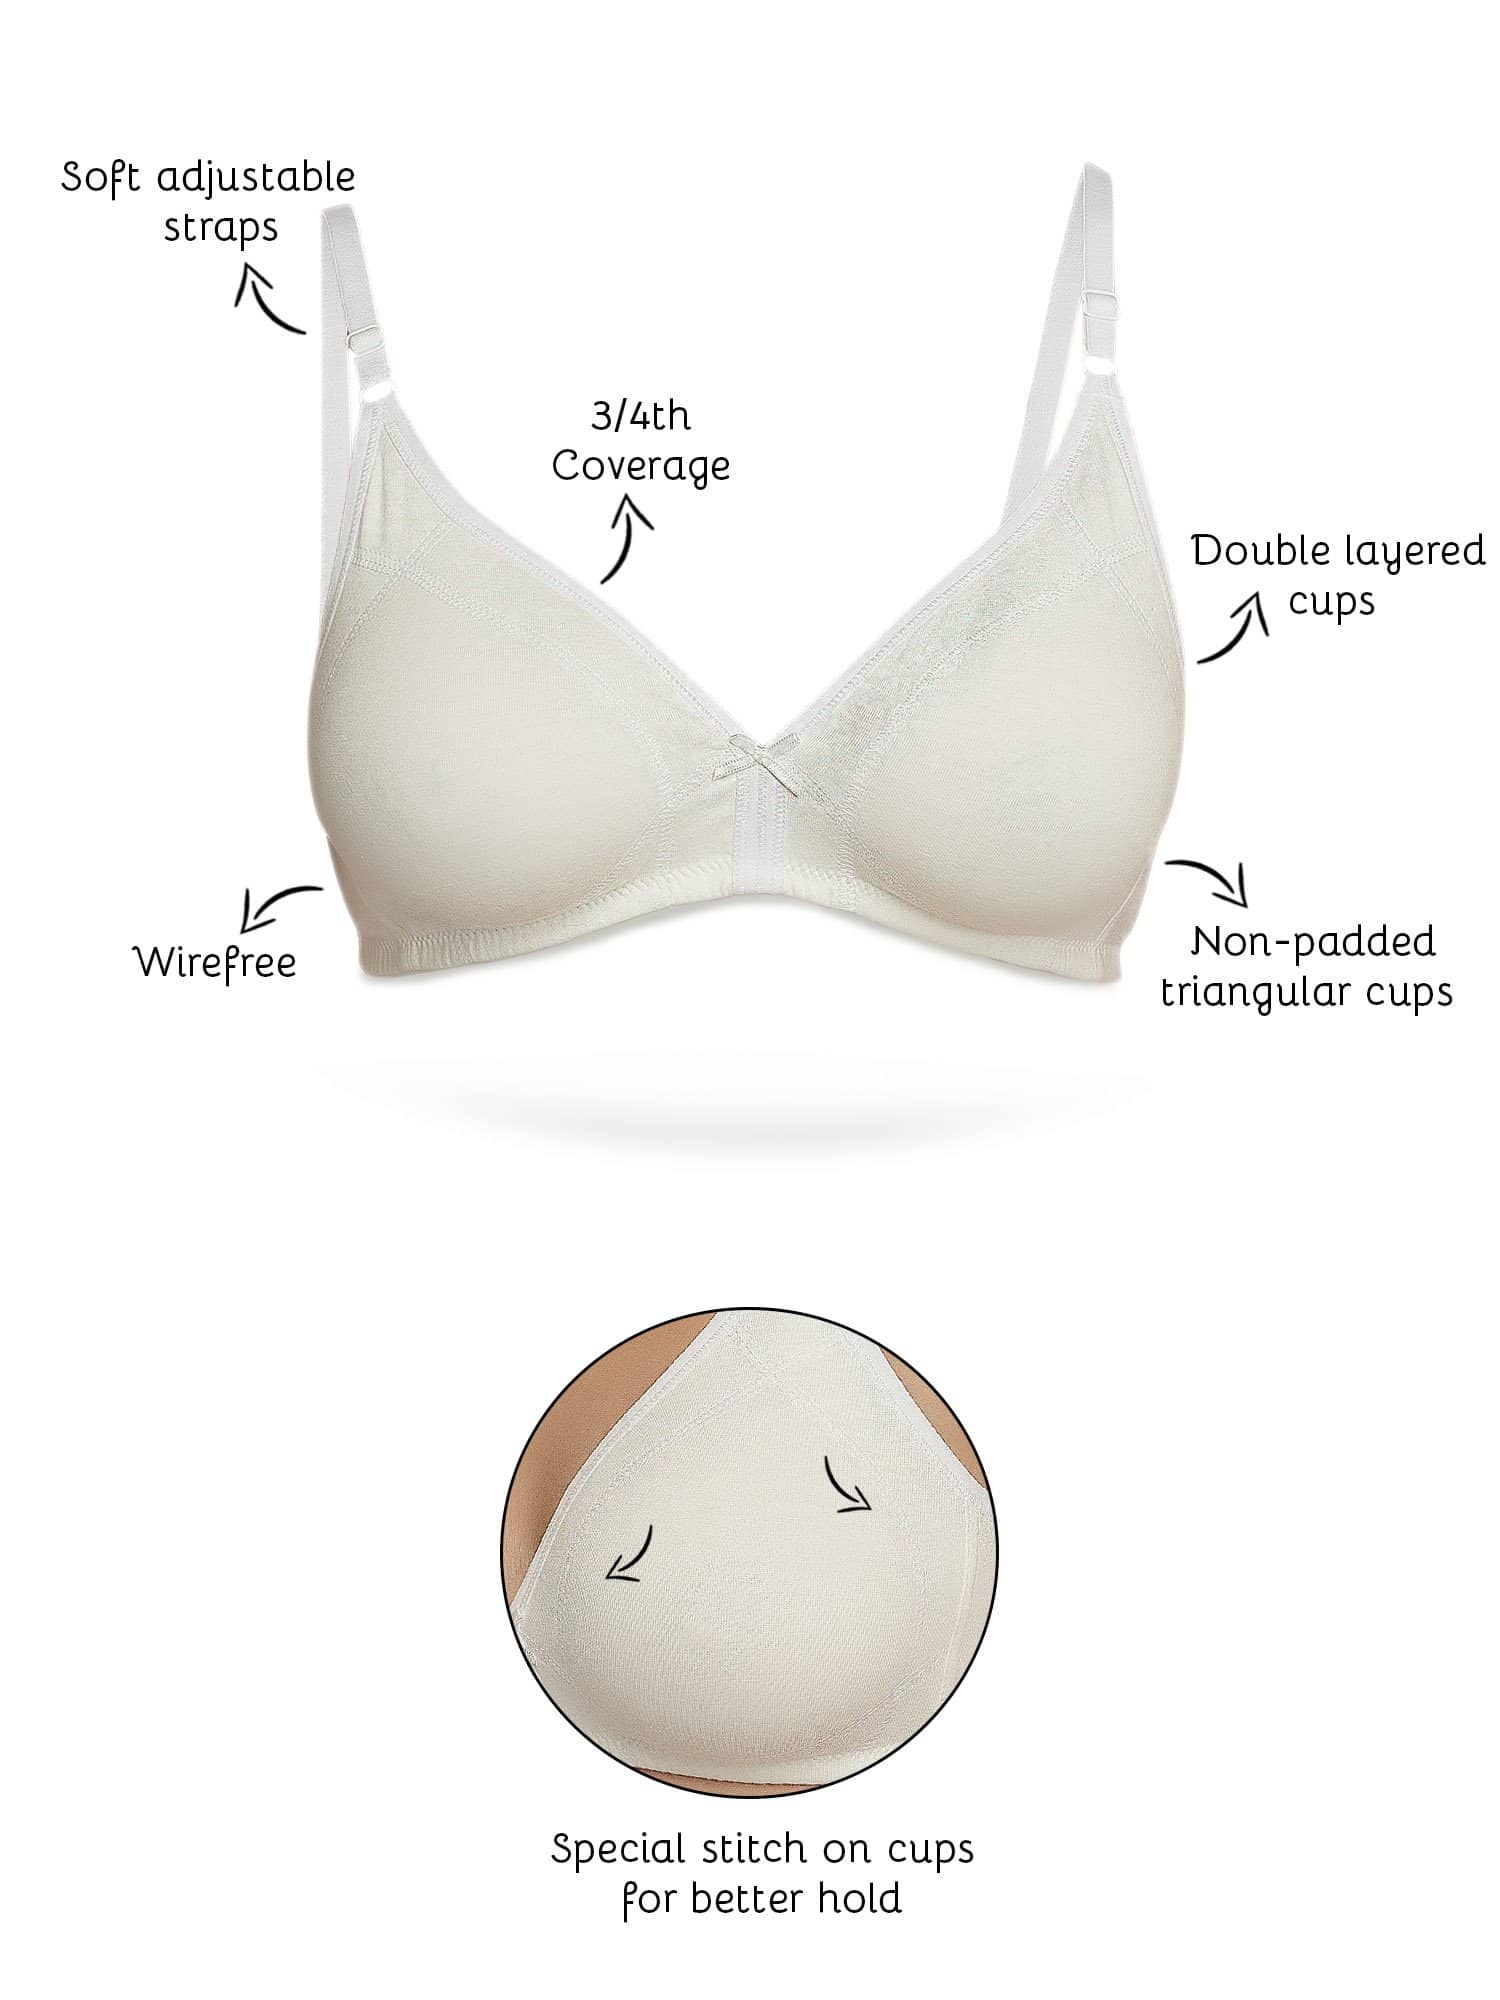 Inner Sense Organic Cotton Antimicrobial Seamless Side Support Bras (Pack  Of 3)-White (32B)